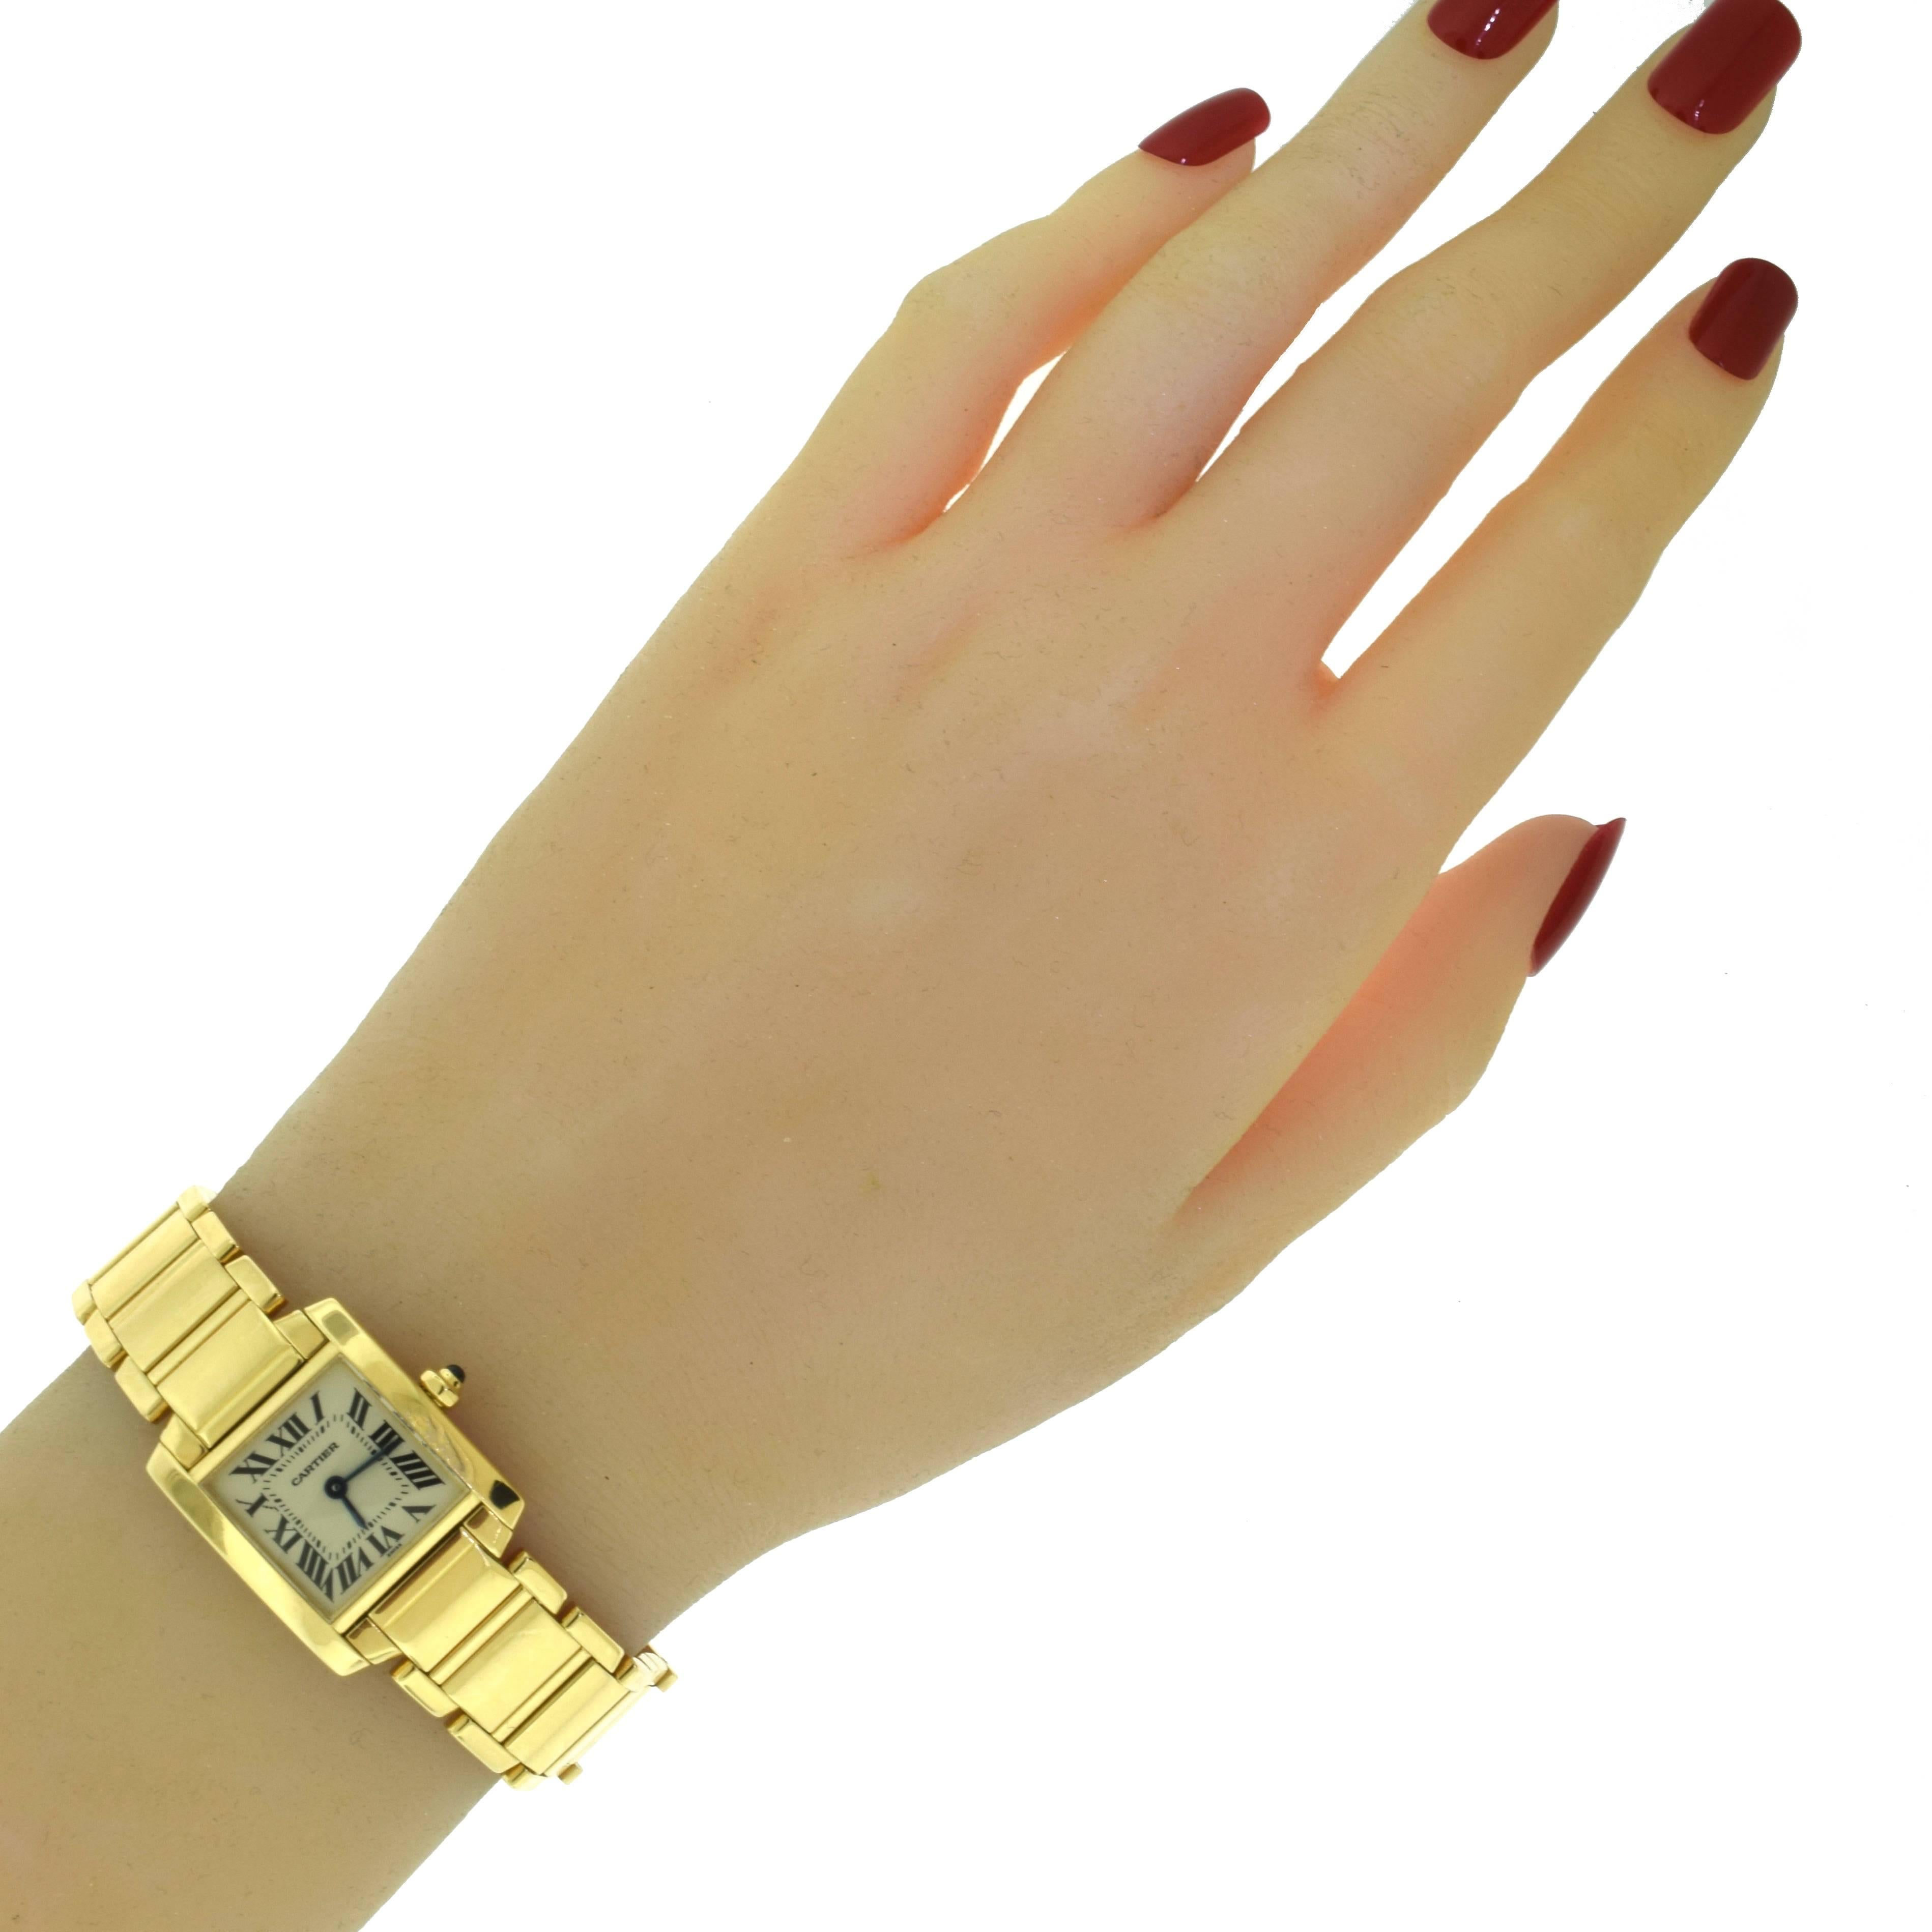 Designer: Cartier
Collection: Tank
Model Name: Française
Ref. Number: 1820 
Movement: Quartz
Case Size: 20 mm in width (without crown), 25 mm in length (with lugs)
Case Shape:  Rectangle
Case Material: 18k Yellow Gold
Hand Style: Sword, Blued